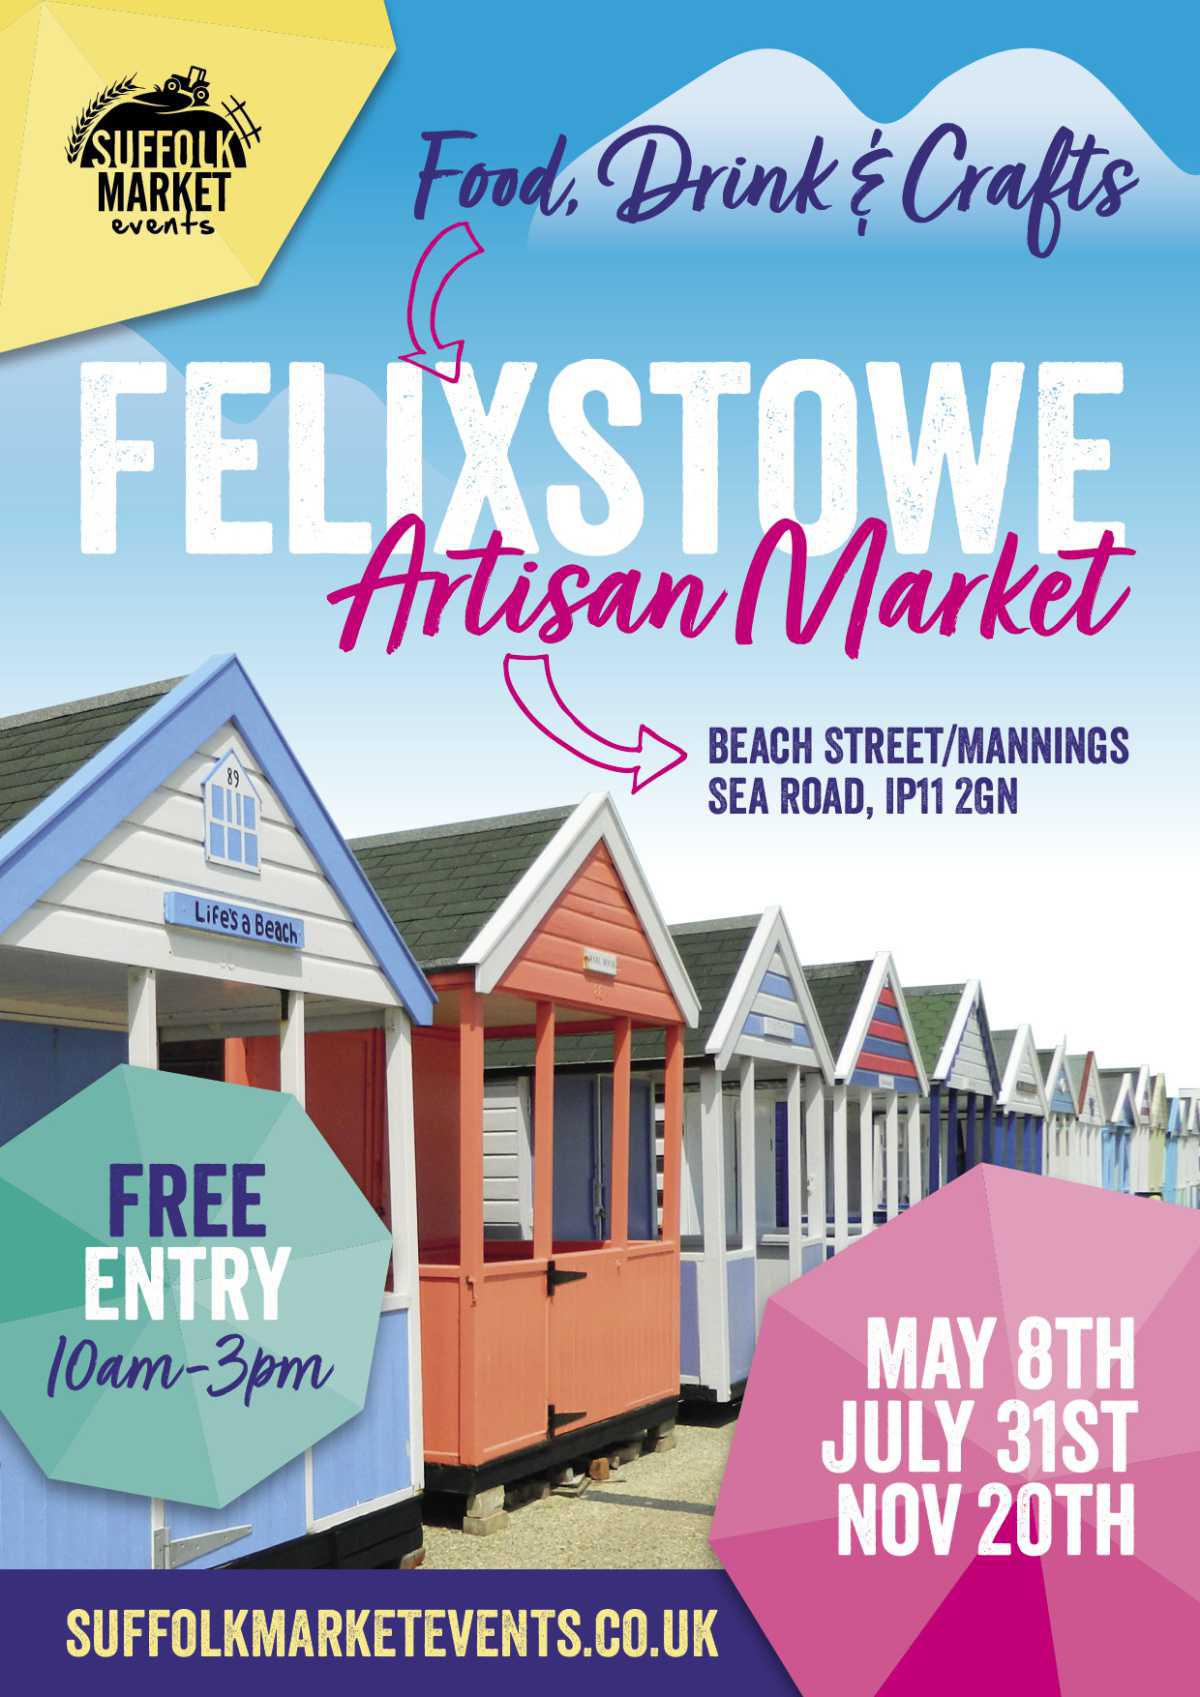 ​Exciting new markets this year in Felixstowe